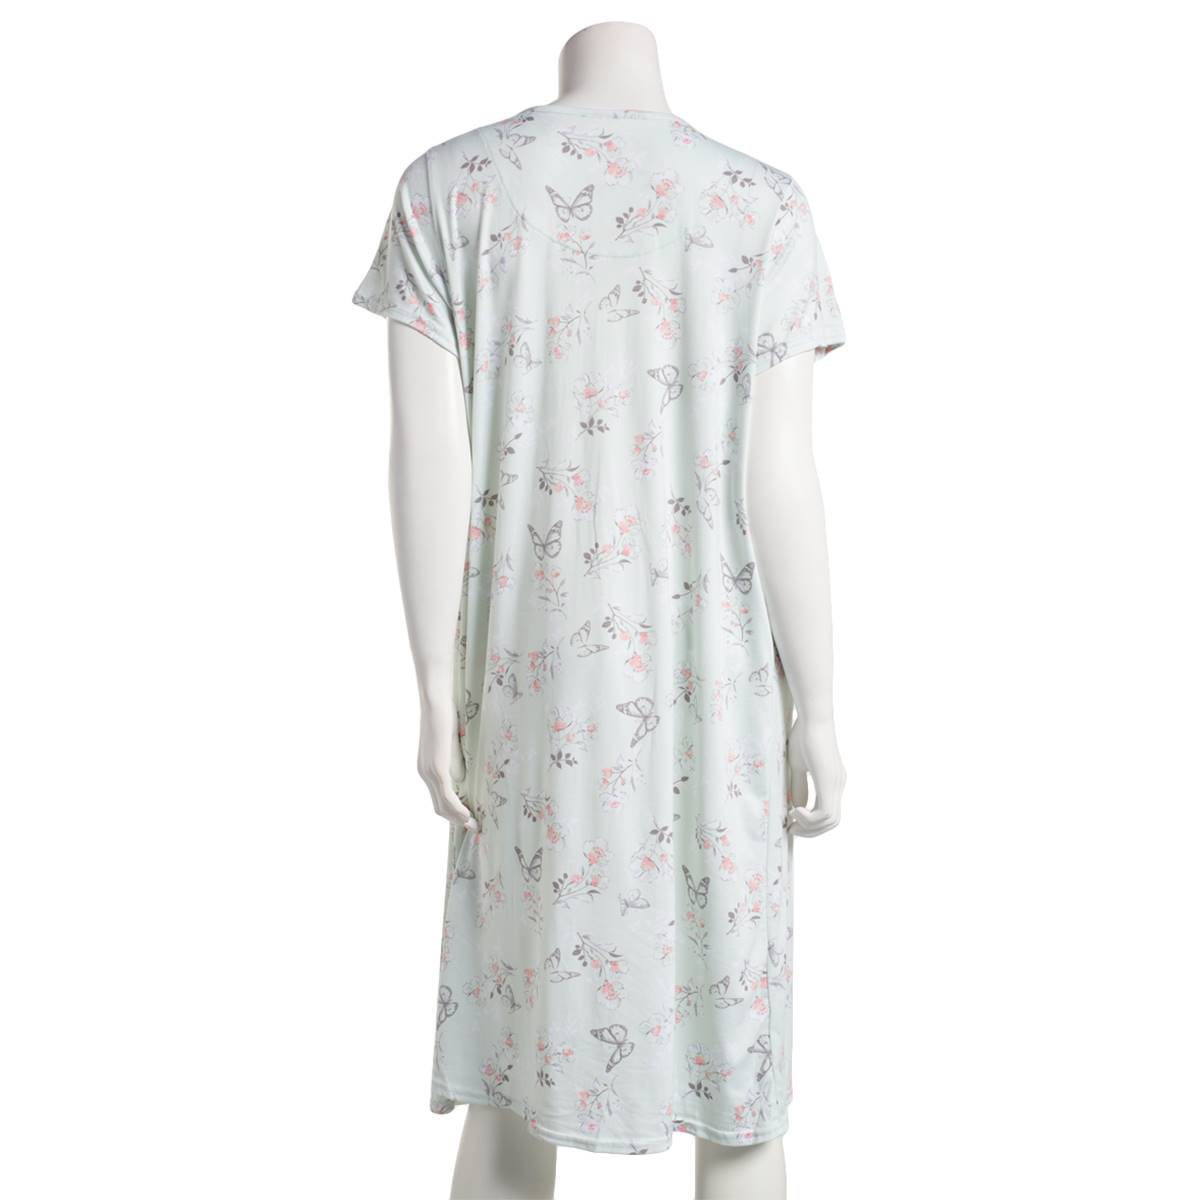 Womens Laura Ashley(R) Short Sleeve Floral Butterfly Nightgown